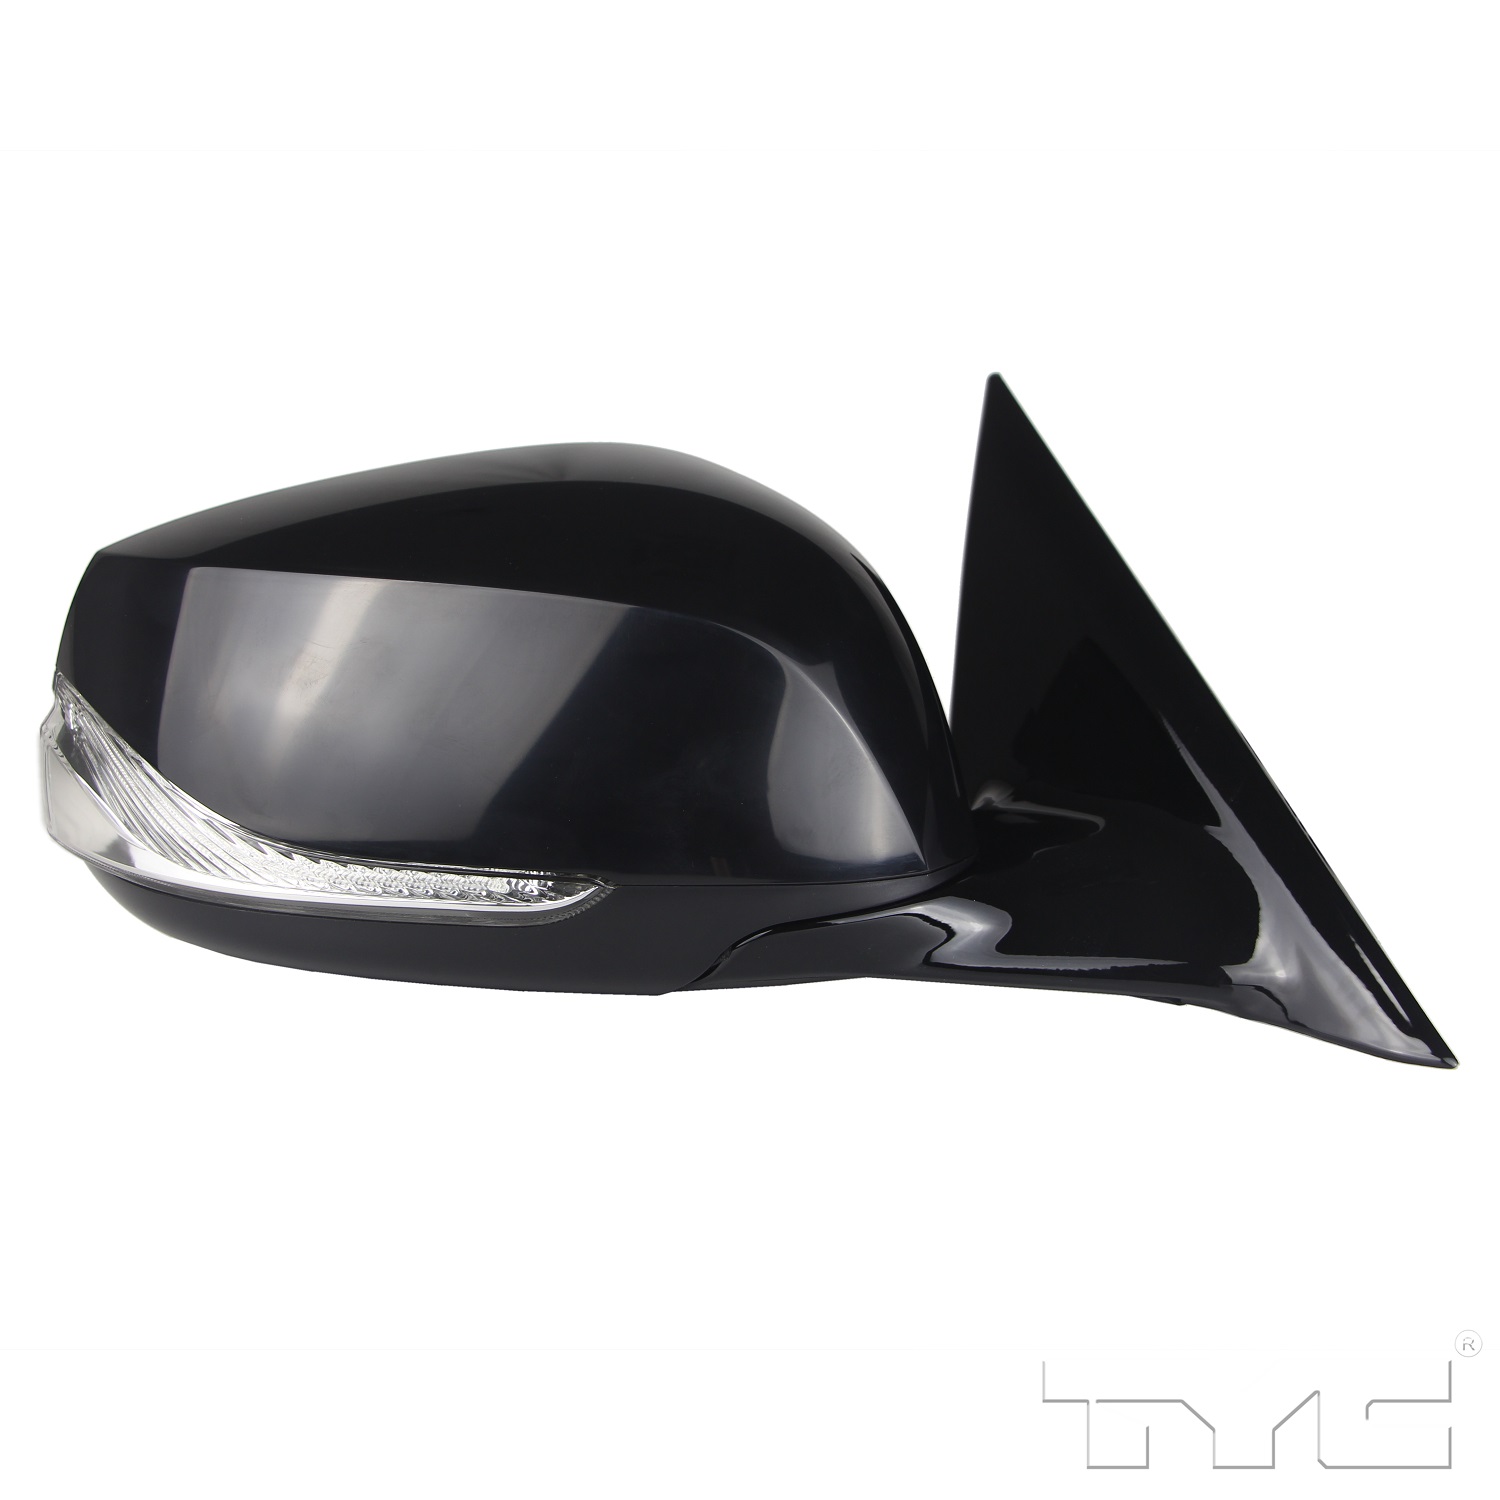 Aftermarket MIRRORS for INFINITI - Q50, Q50,14-17,RT Mirror outside rear view